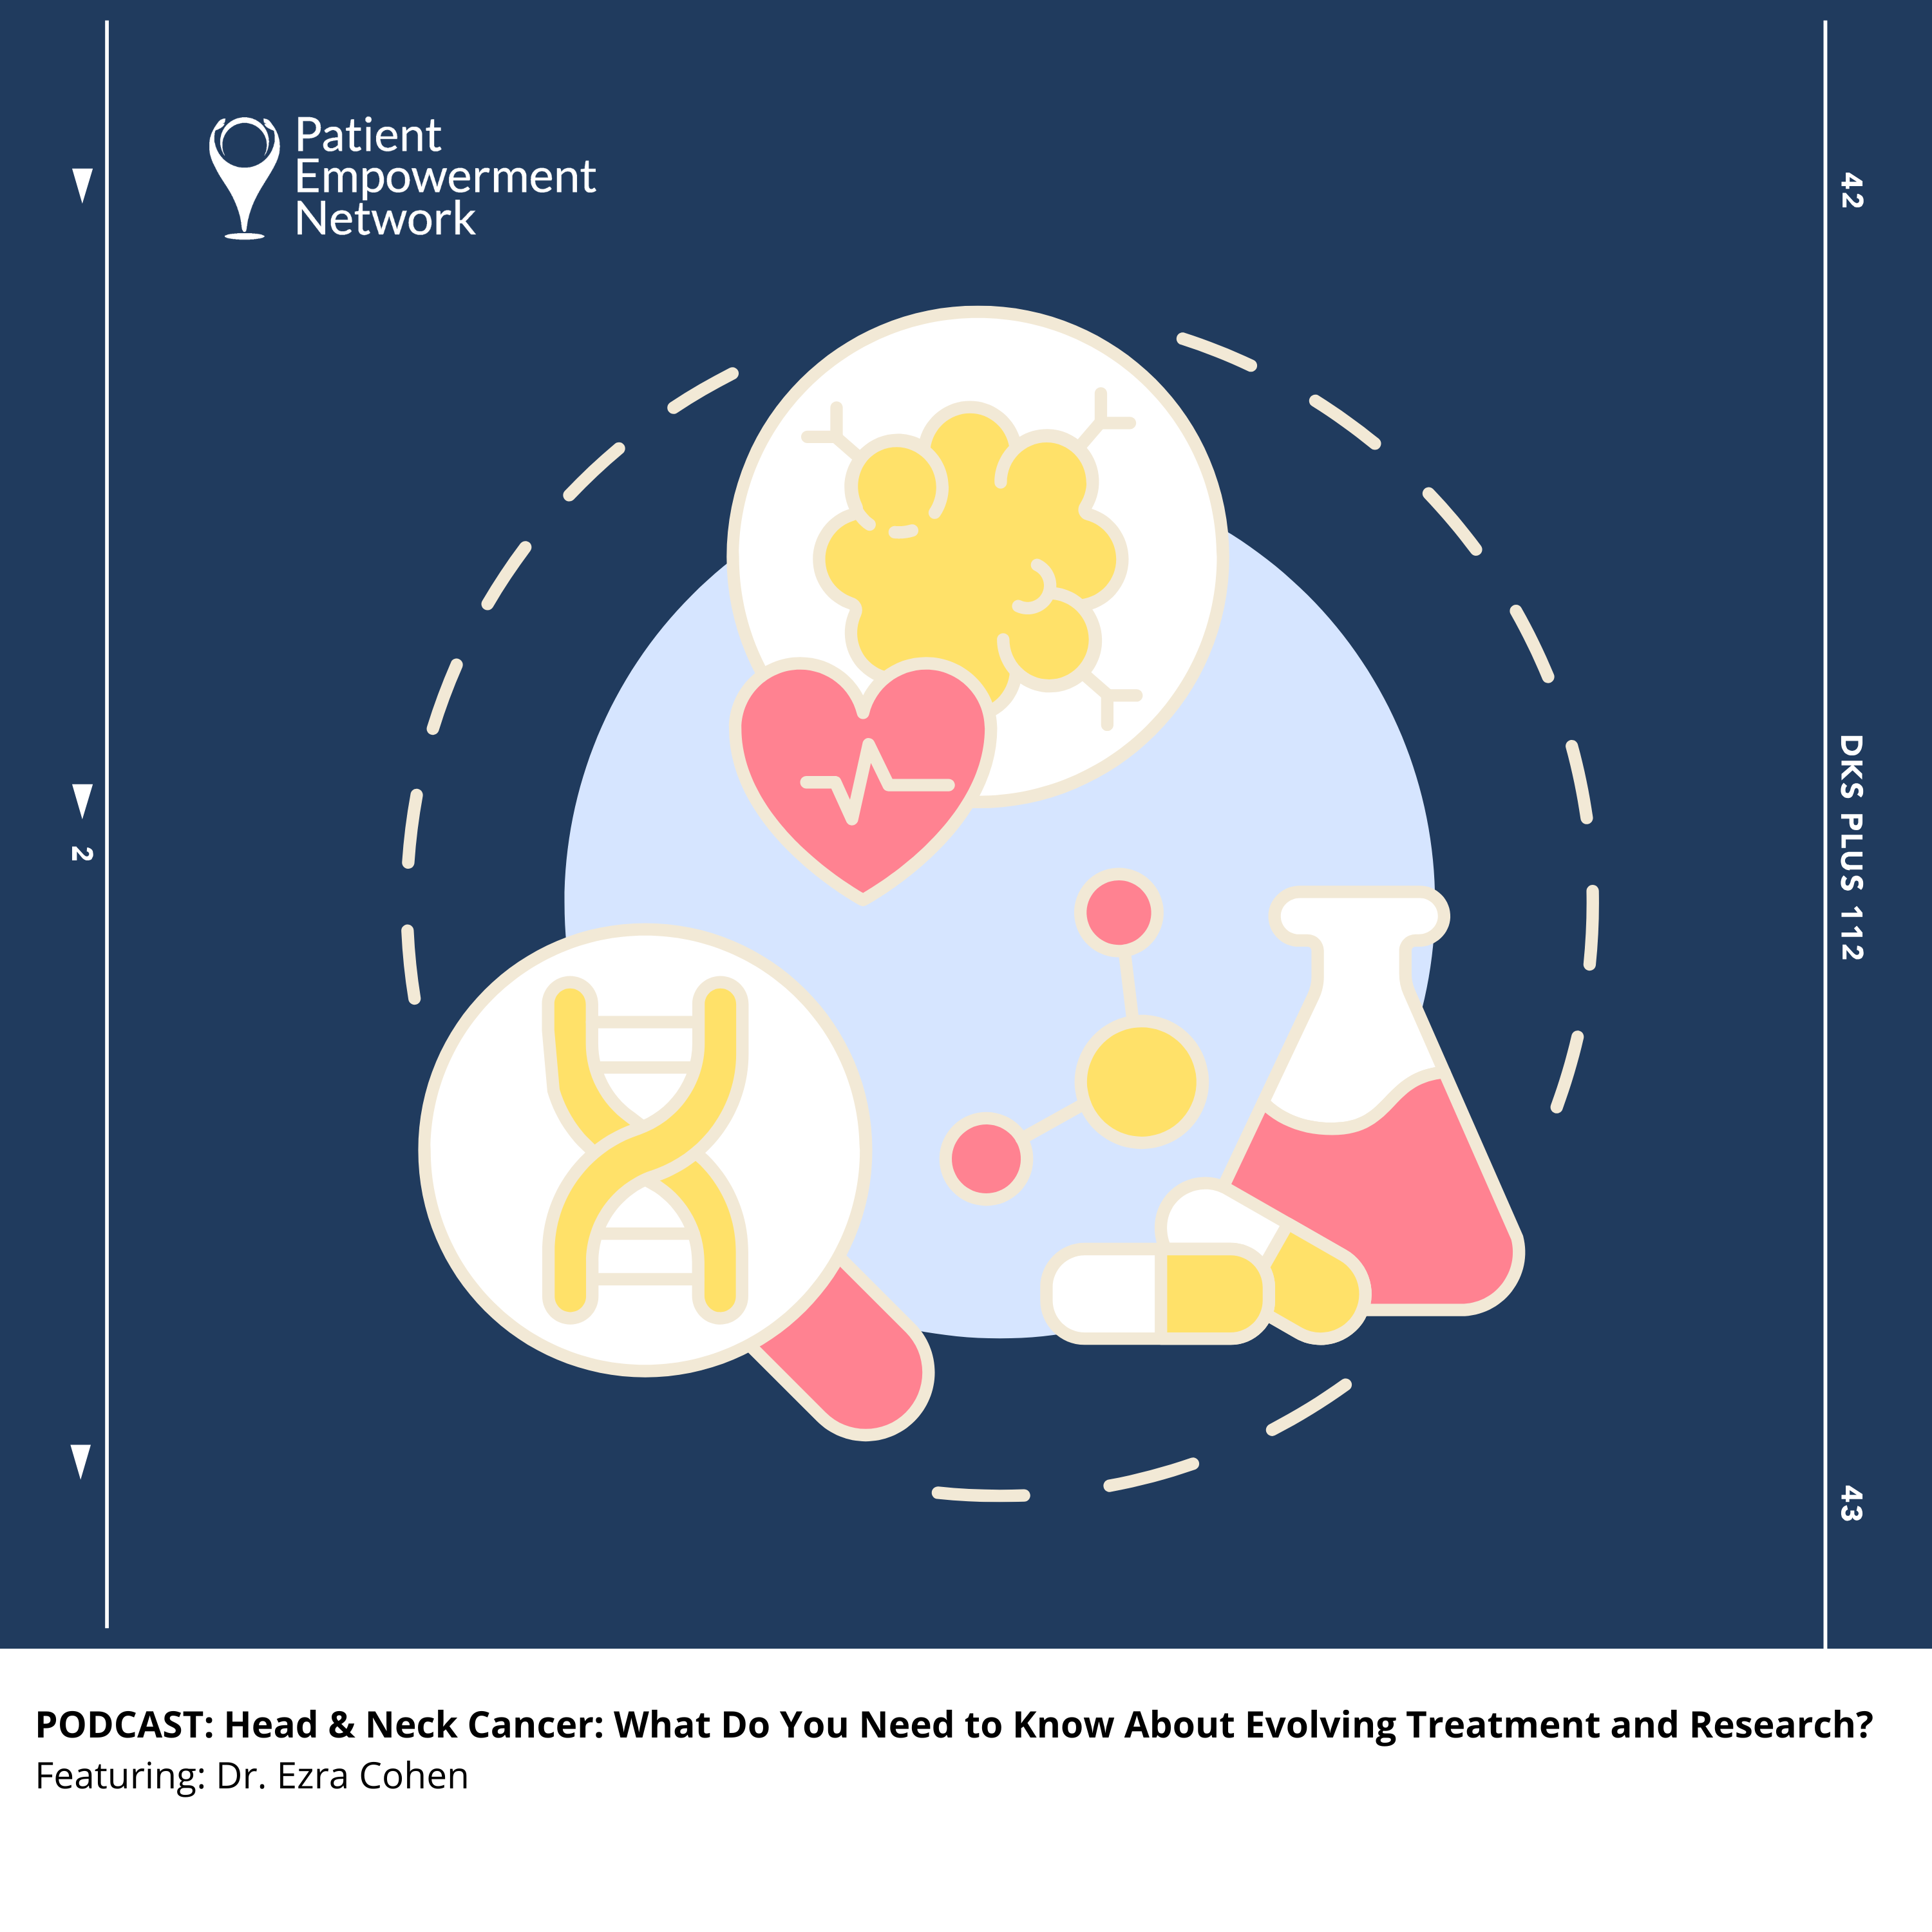 PODCAST: Head & Neck Cancer: What Do You Need to Know About Evolving Treatment and Research?